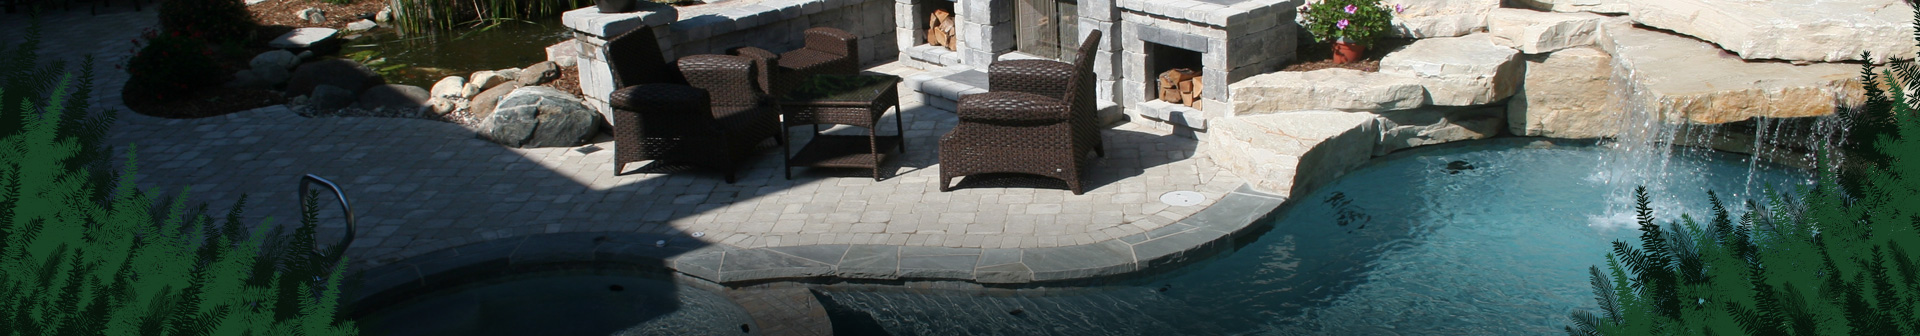 Outdoor living space designed for you in Delafield, WI